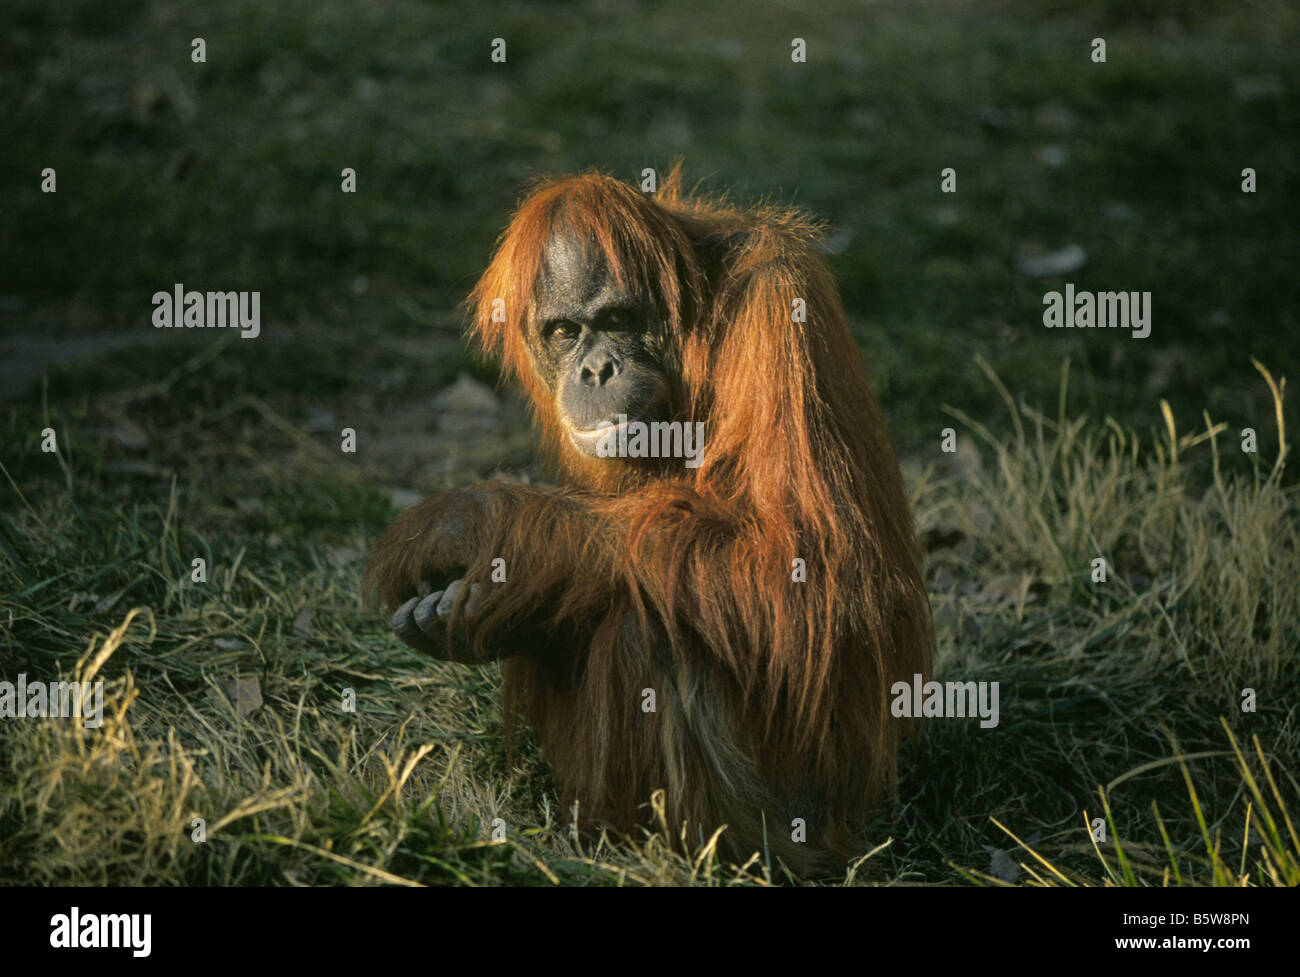 A young orangutan looks wistfully at the camera in a shady spot in its habitat in the Albuquerque Zoo, Albuquerque, New Mexico. Stock Photo